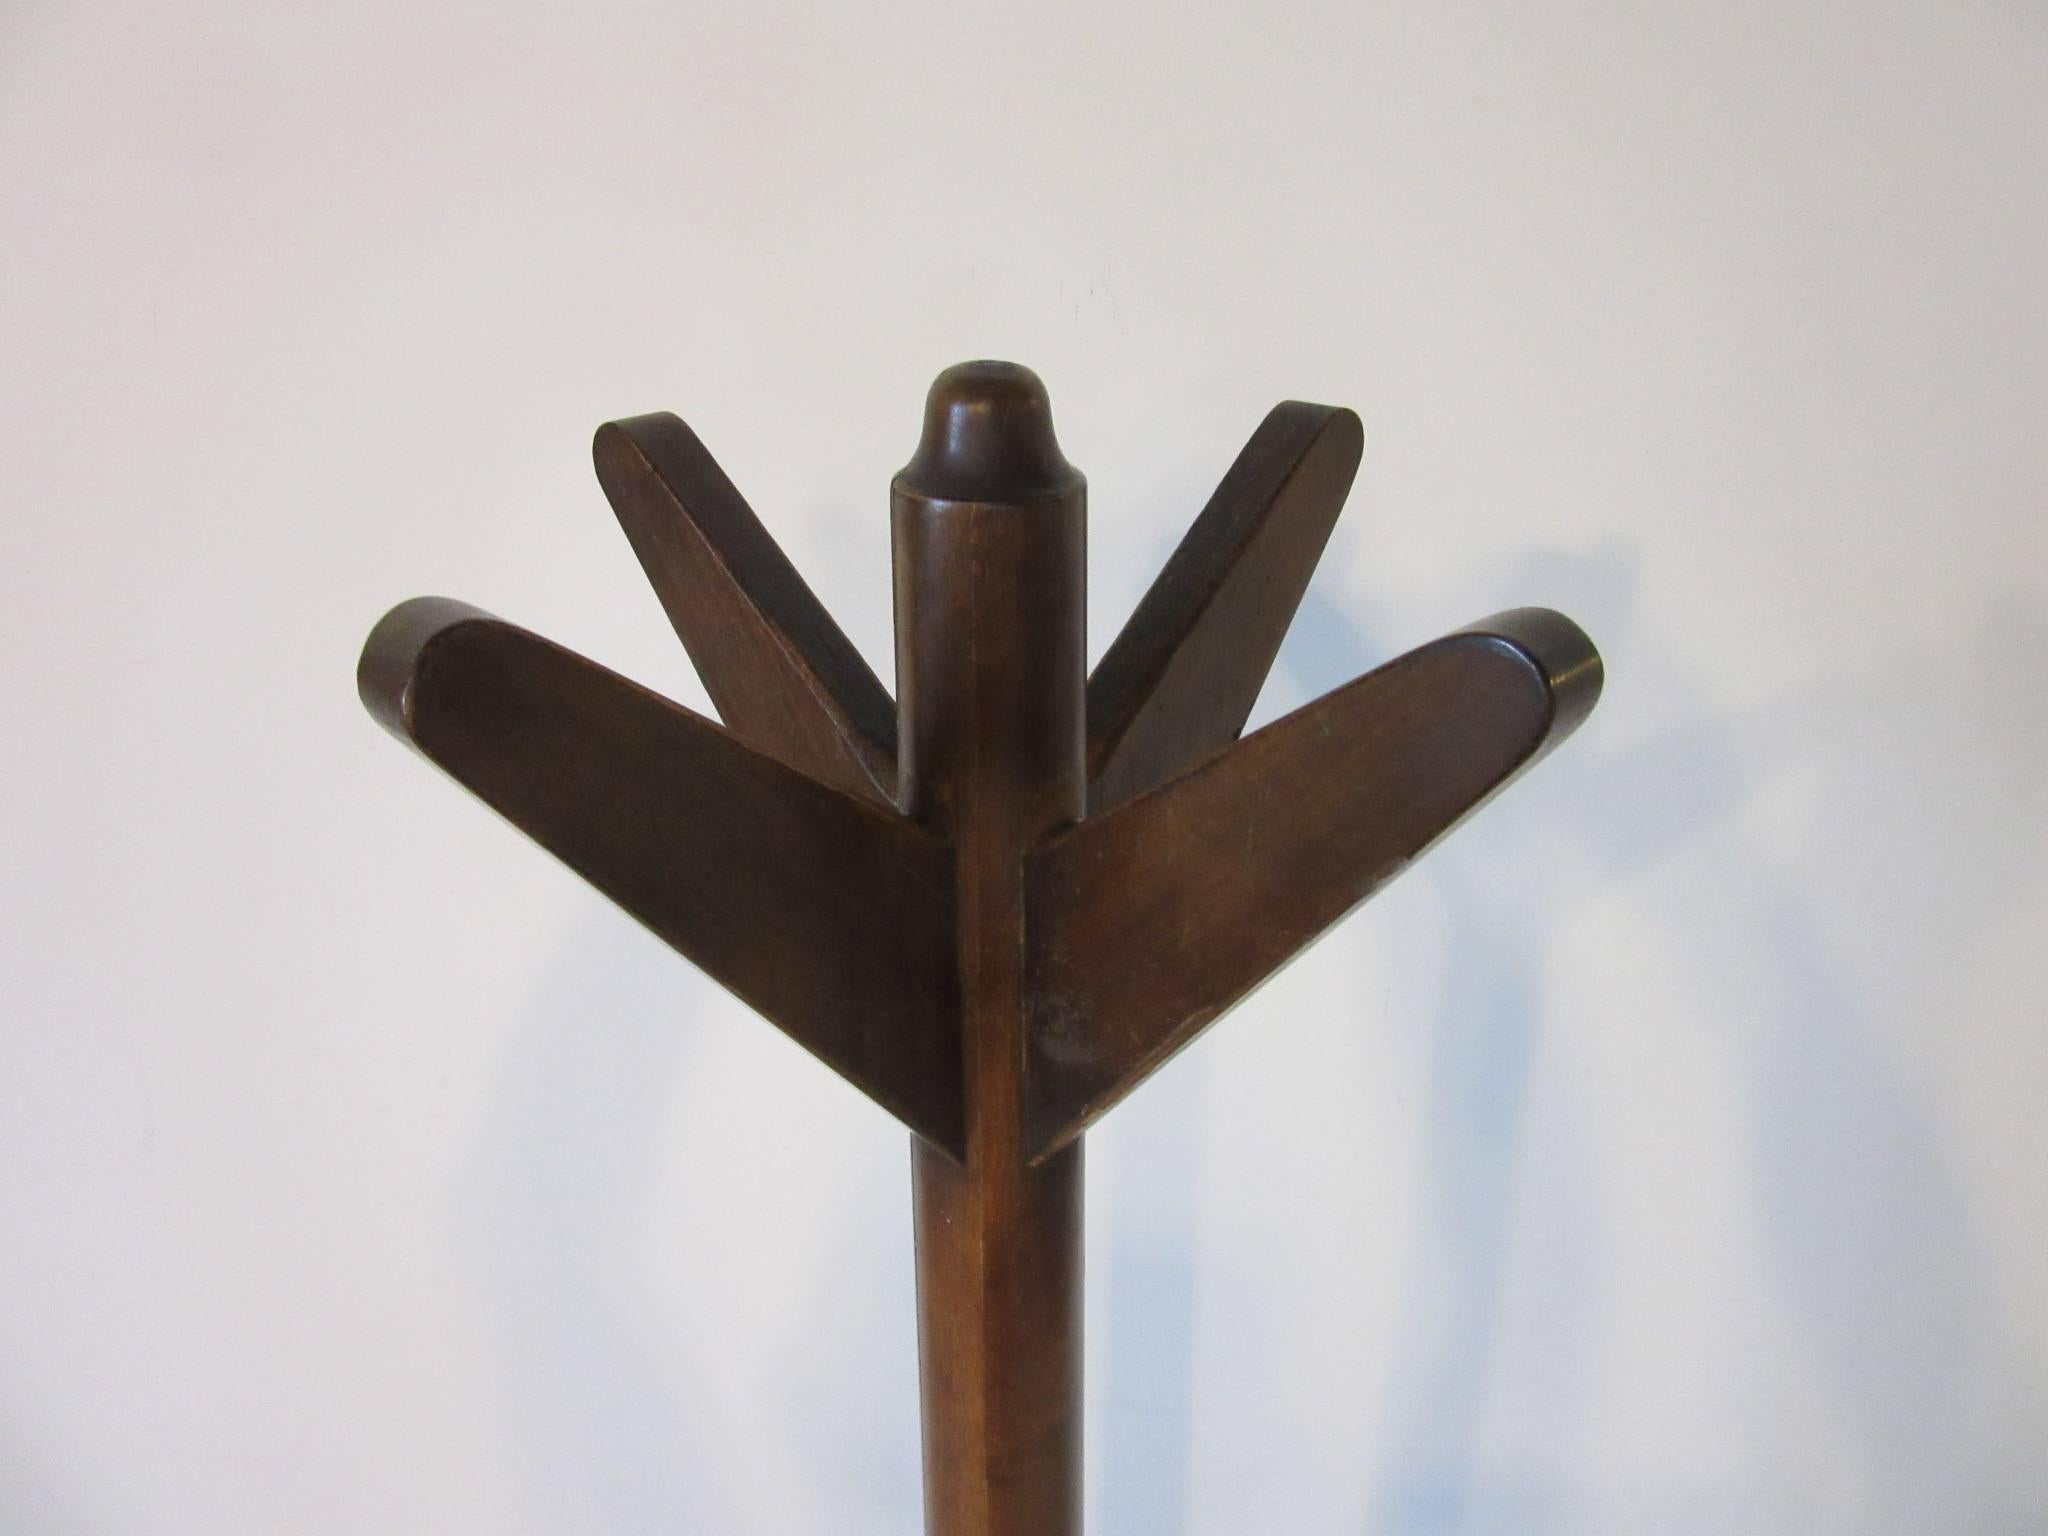 A rare wood and leather coat rack with wonderful lines designed by one of the best of his period Gilbert Rohde when he was chief designer for Herman Miller furniture company. Detailed top prongs, base in textured leather with metal stud detail, from